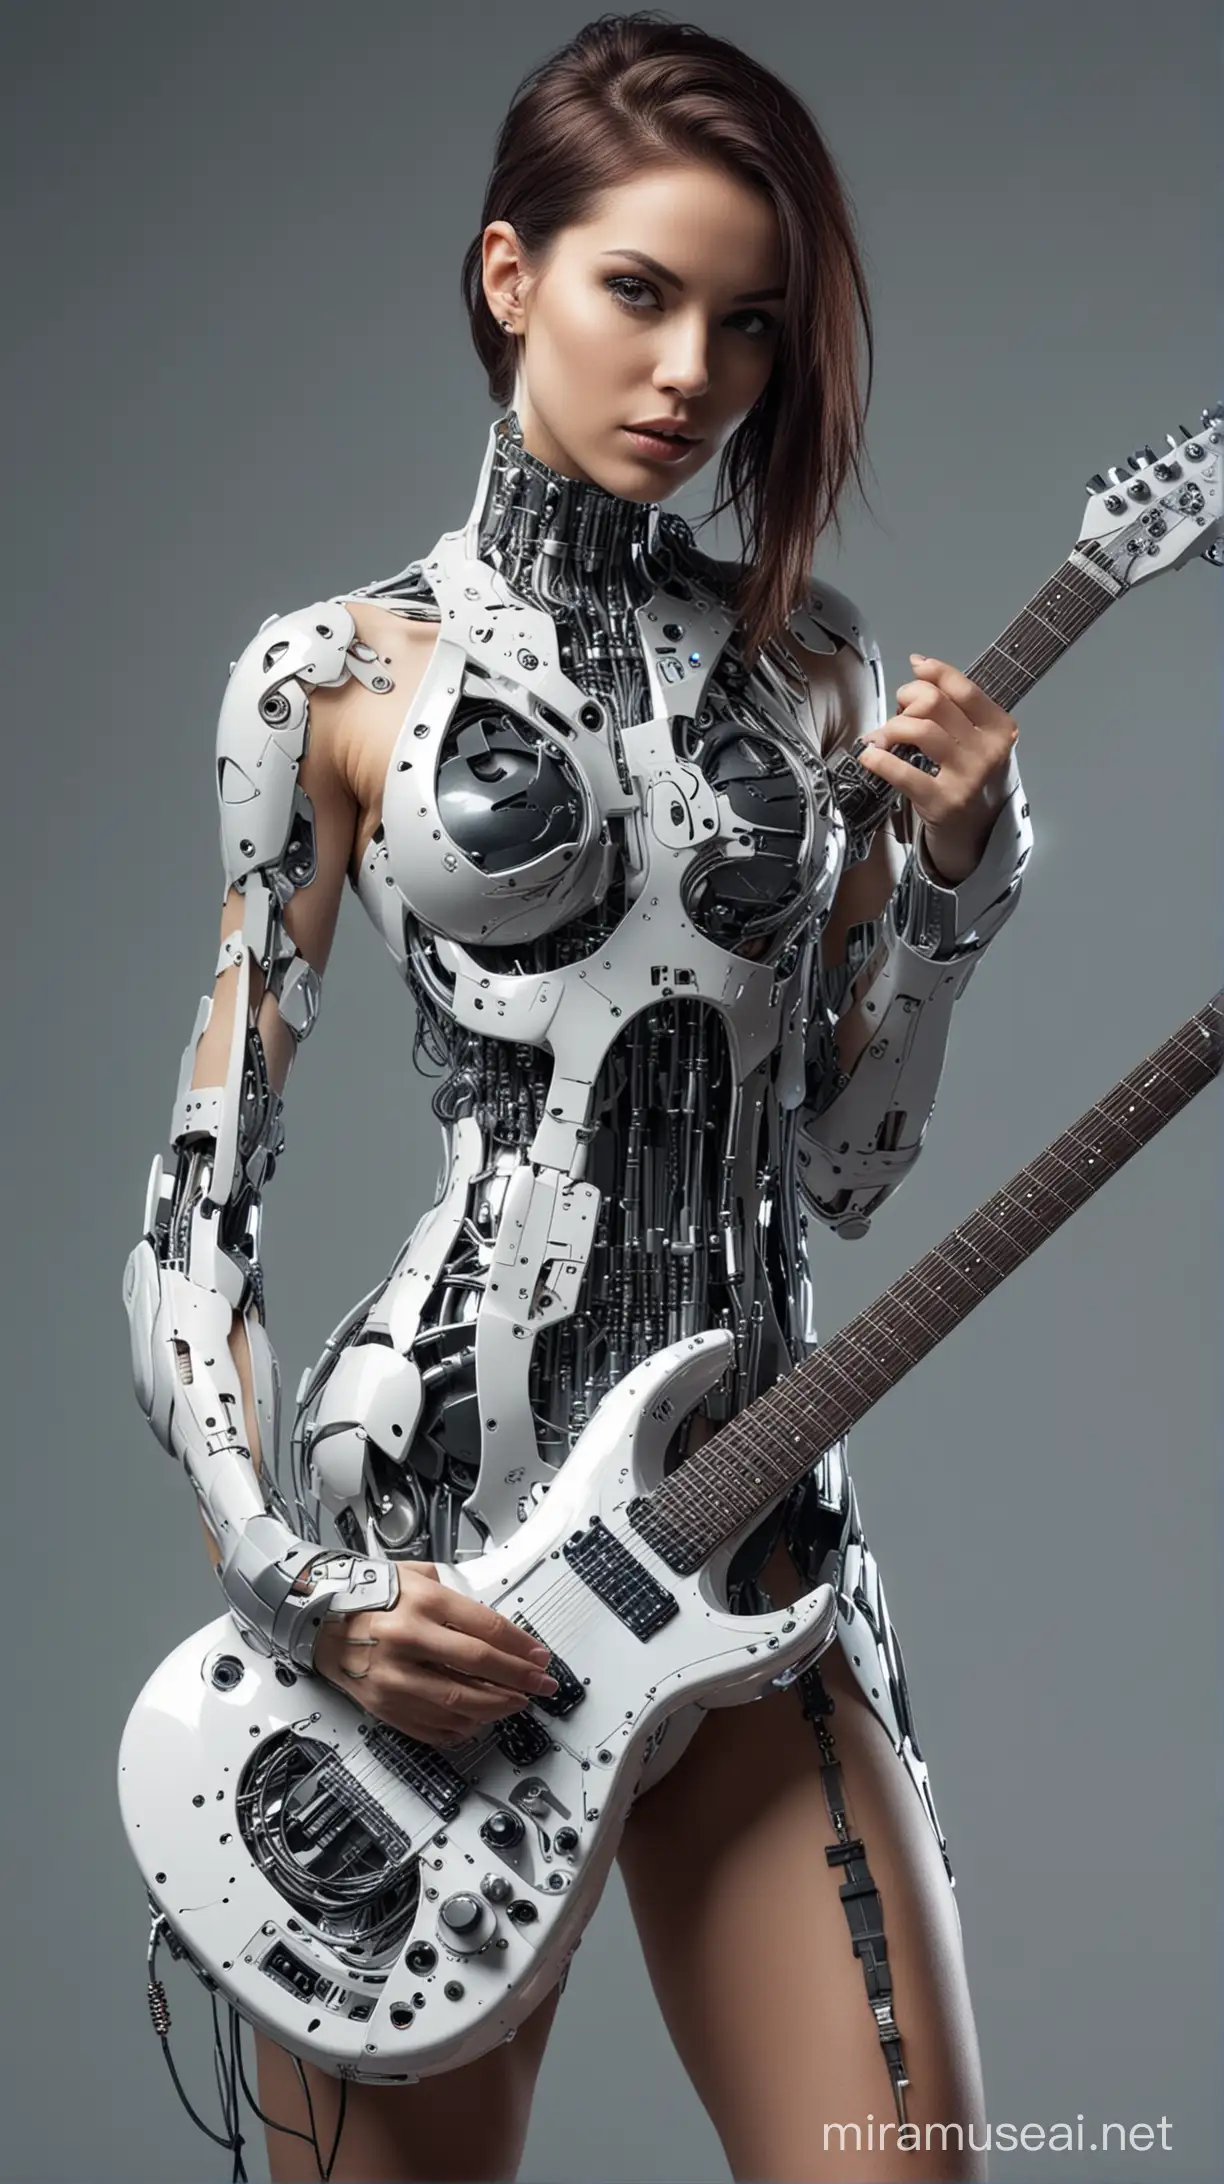 Futuristic Cybernetic Woman with guitar with Gigeresque Aesthetic